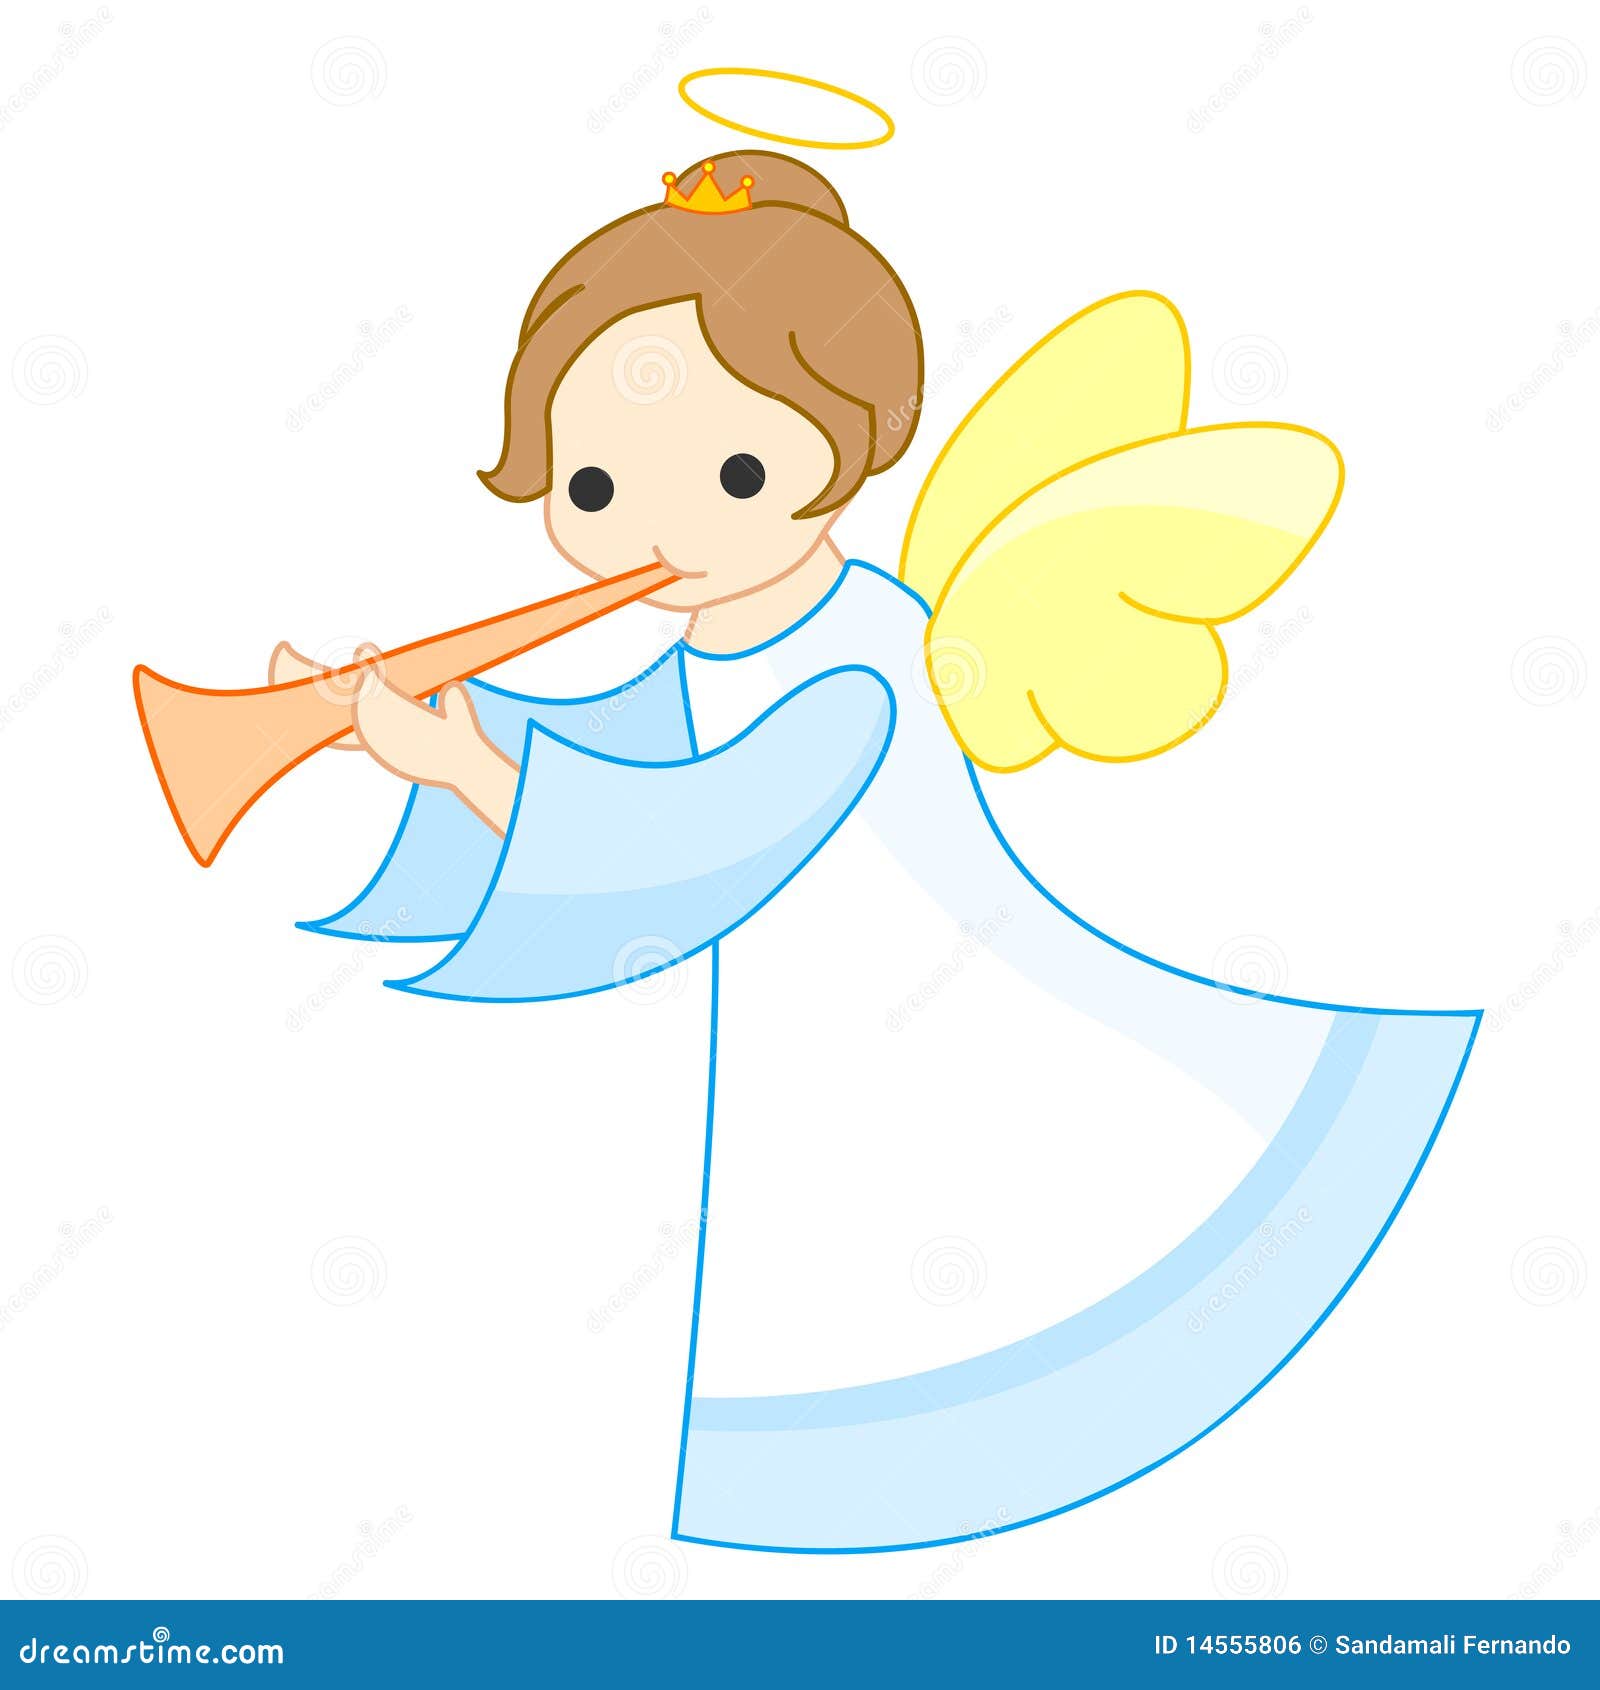 little angel clipart free - photo #35